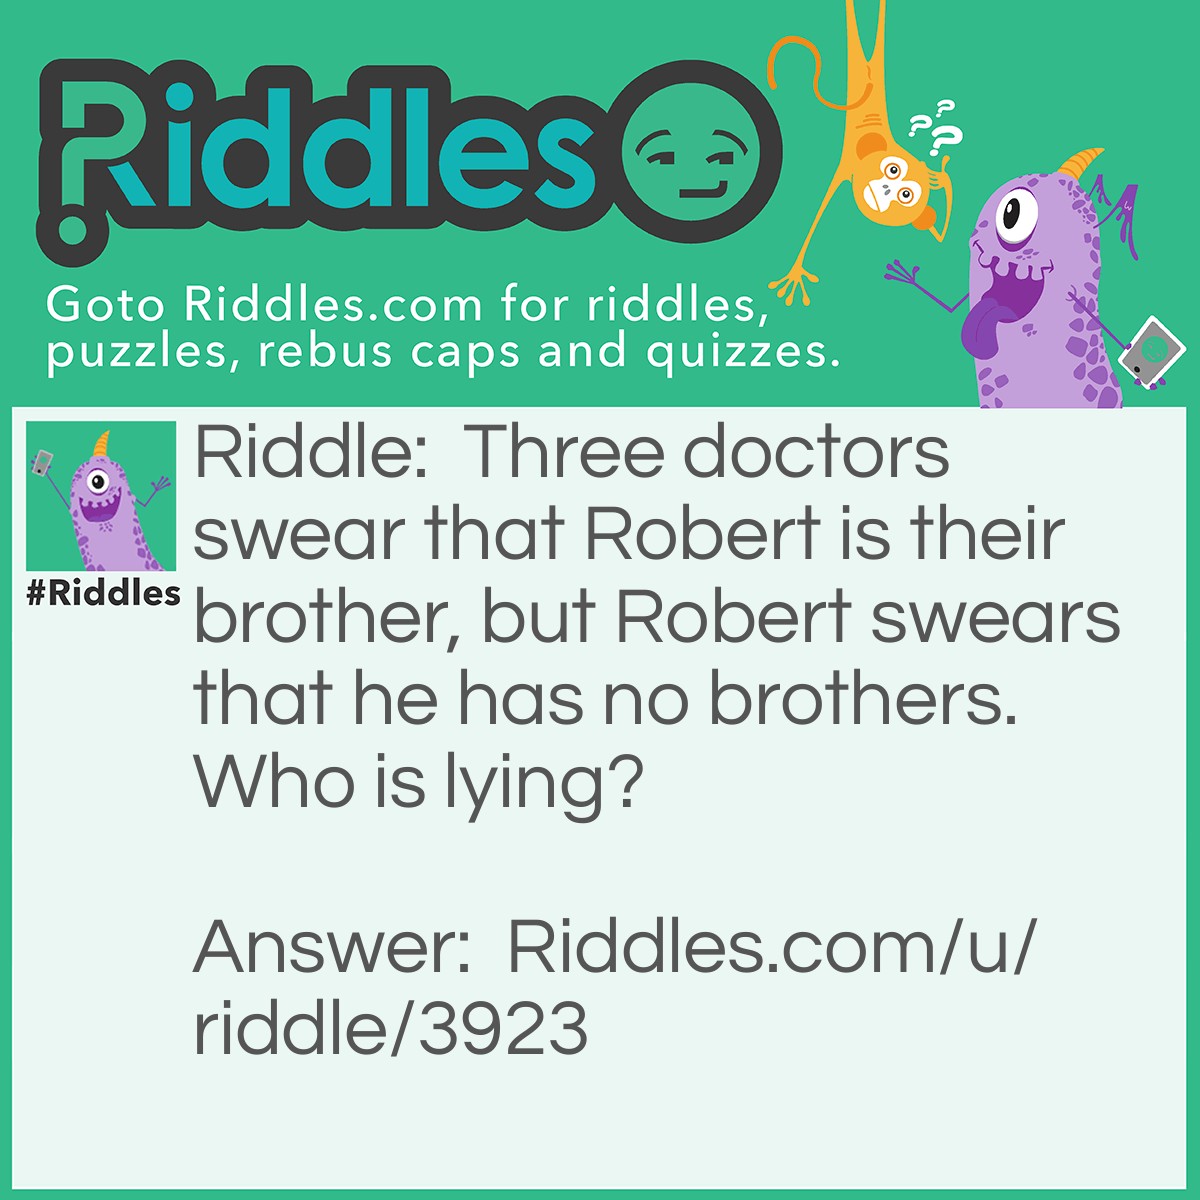 Riddle: Three doctors swear that Robert is their brother, but Robert swears that he has no brothers. Who is lying? Answer: Neither, doctors CAN be girls.